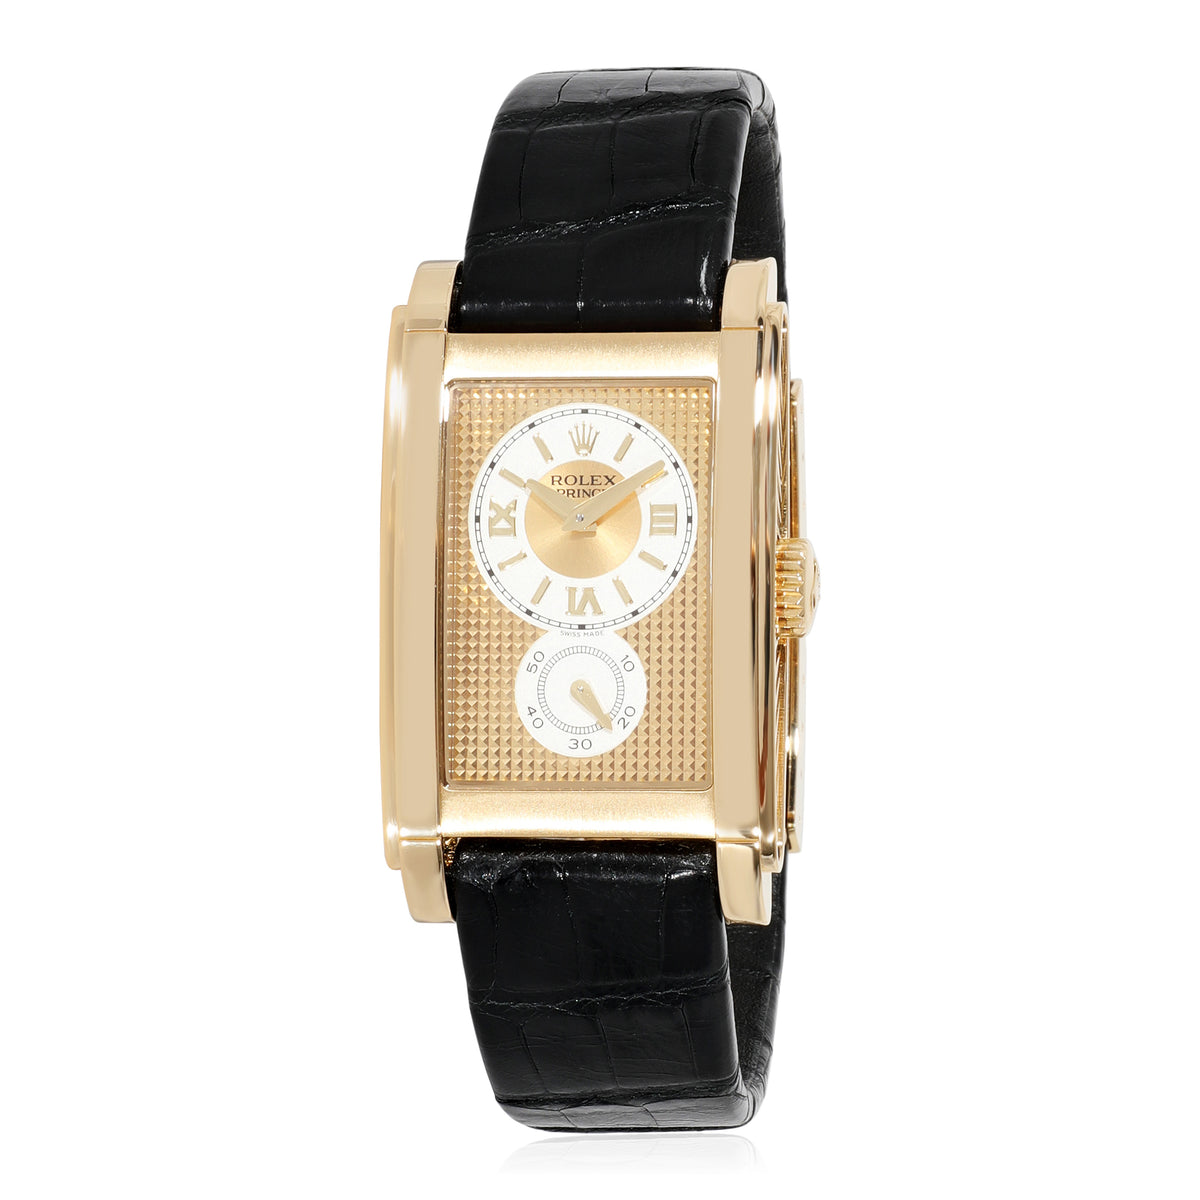 Rolex Cellini Prince 5440/8 Men's Watch in 18kt Yellow Gold